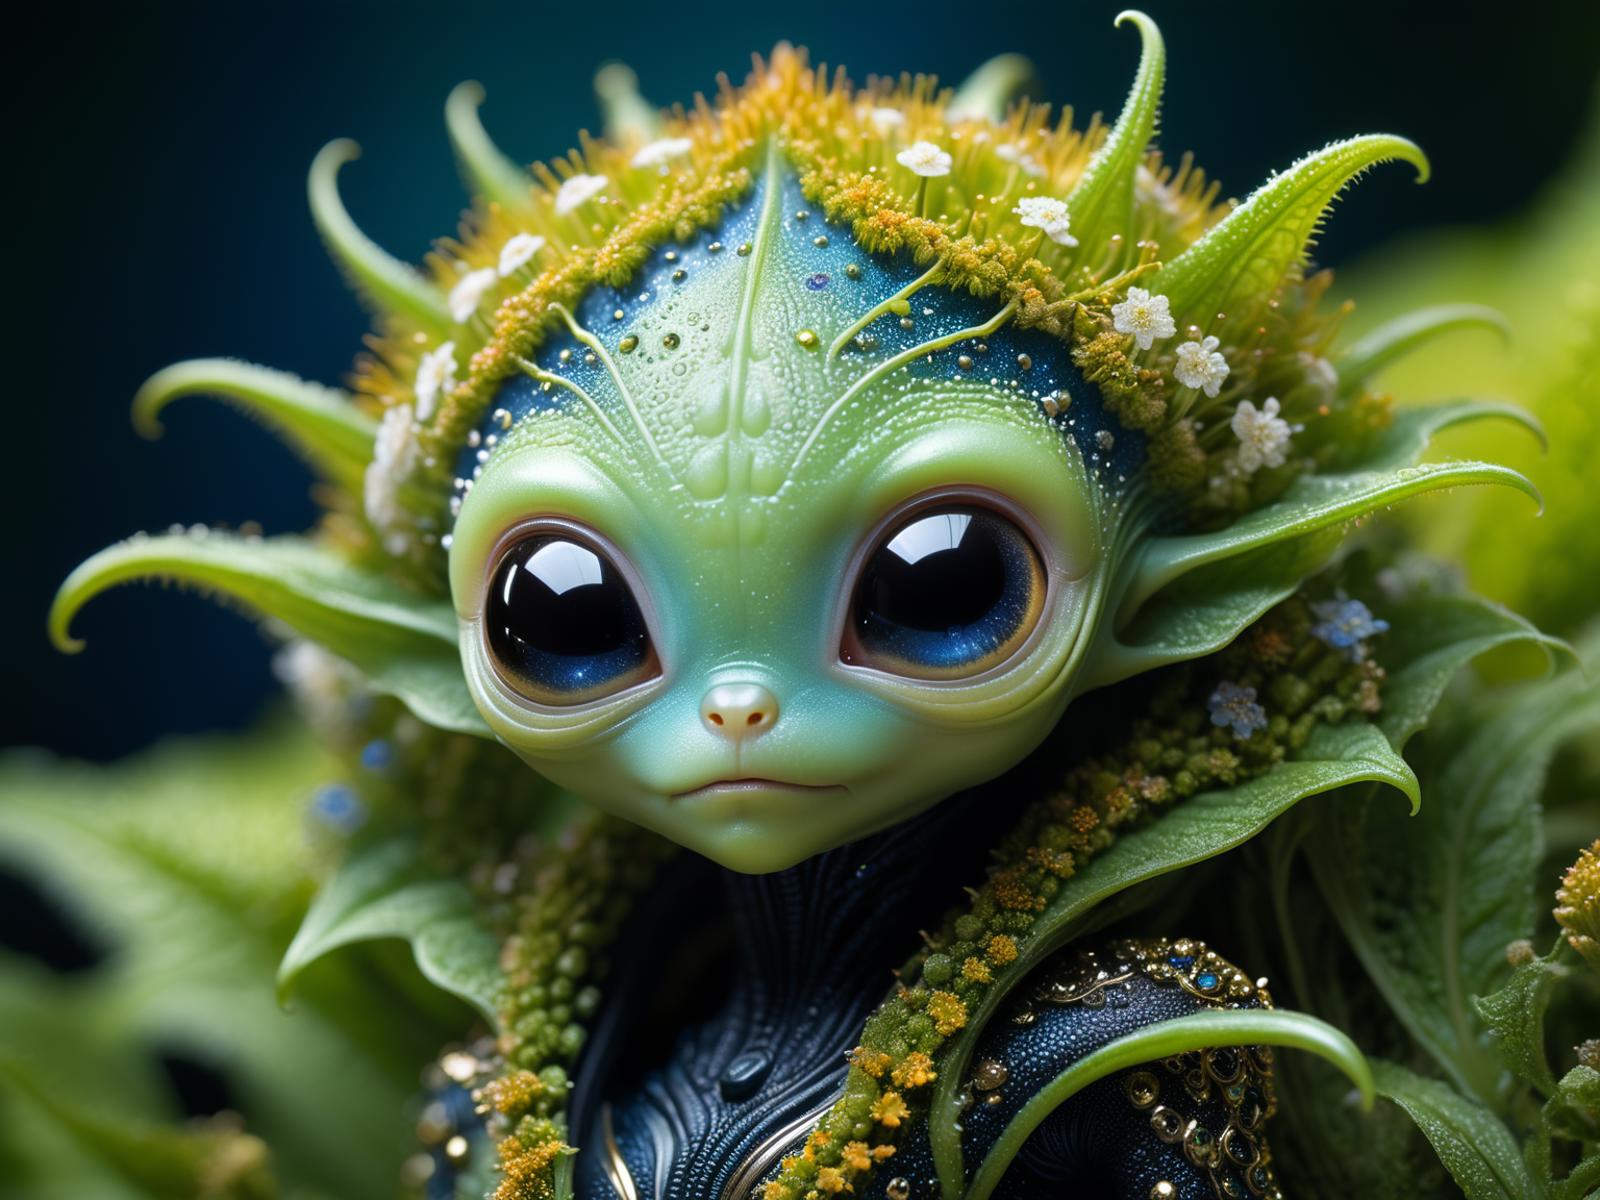 A small green creature with blue eyes and a blue crown of flowers on its head.